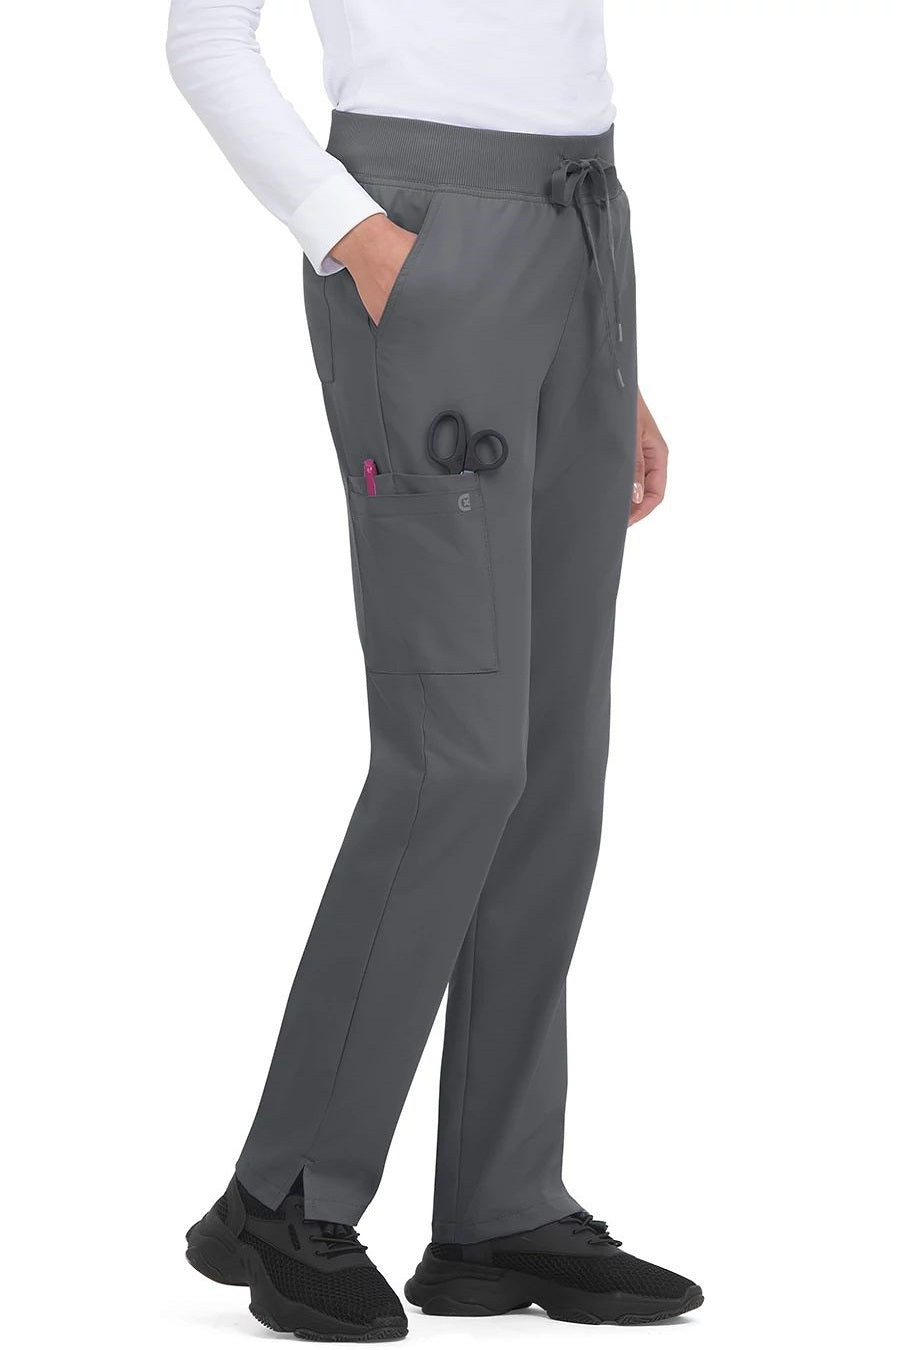 koi Scrub Pants Cureology Atria in Petite Pewter at Parker's Clothing and Shoes.